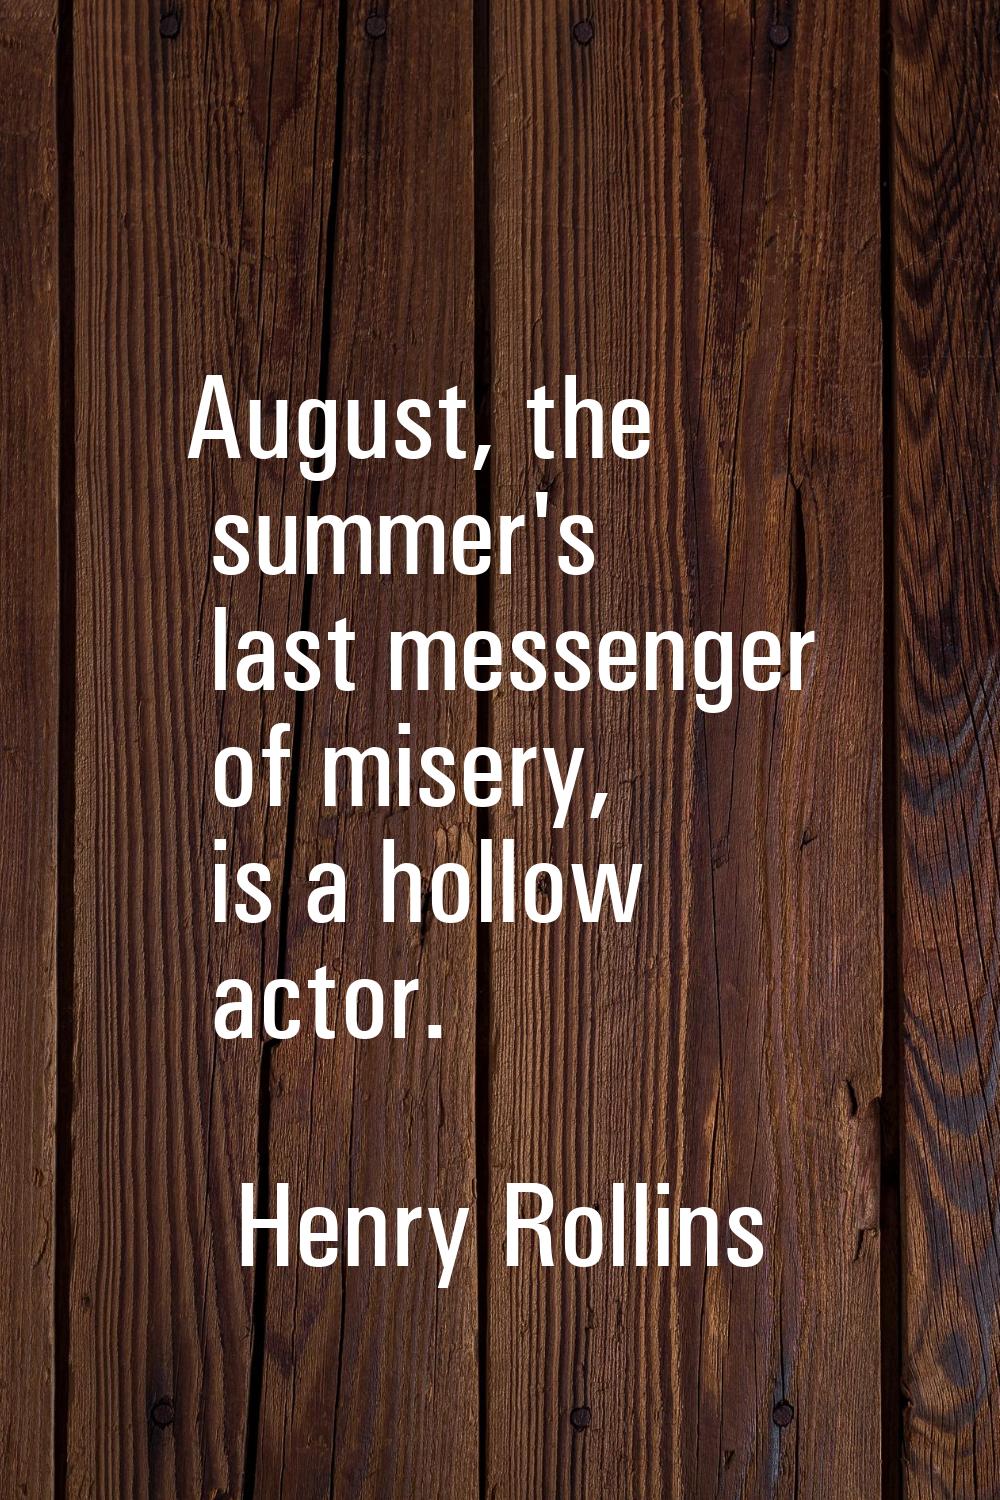 August, the summer's last messenger of misery, is a hollow actor.